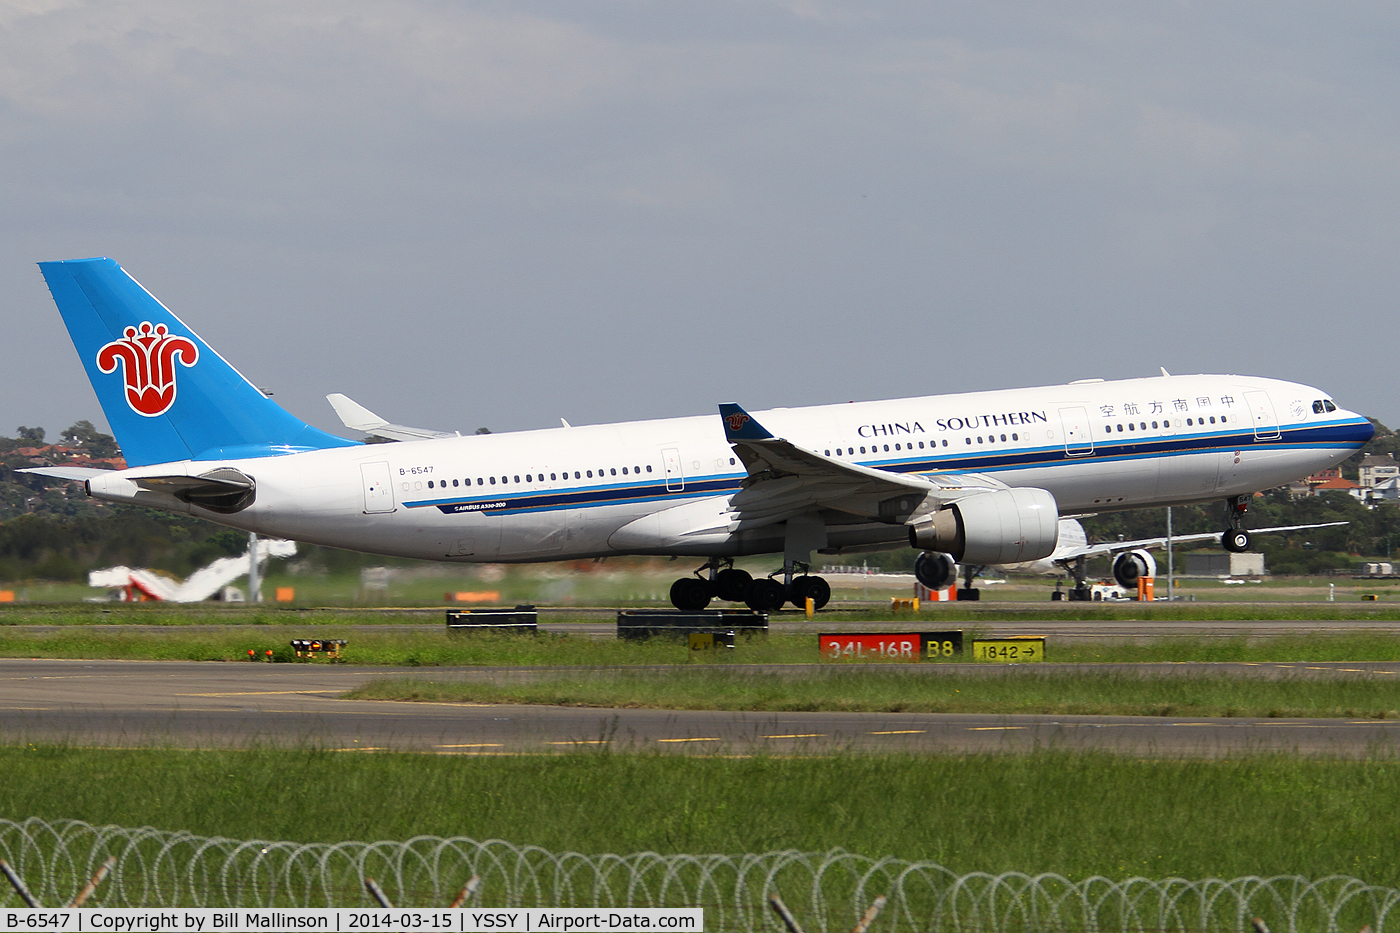 B-6547, 2012 Airbus A330-223 C/N 1309, away from 34L